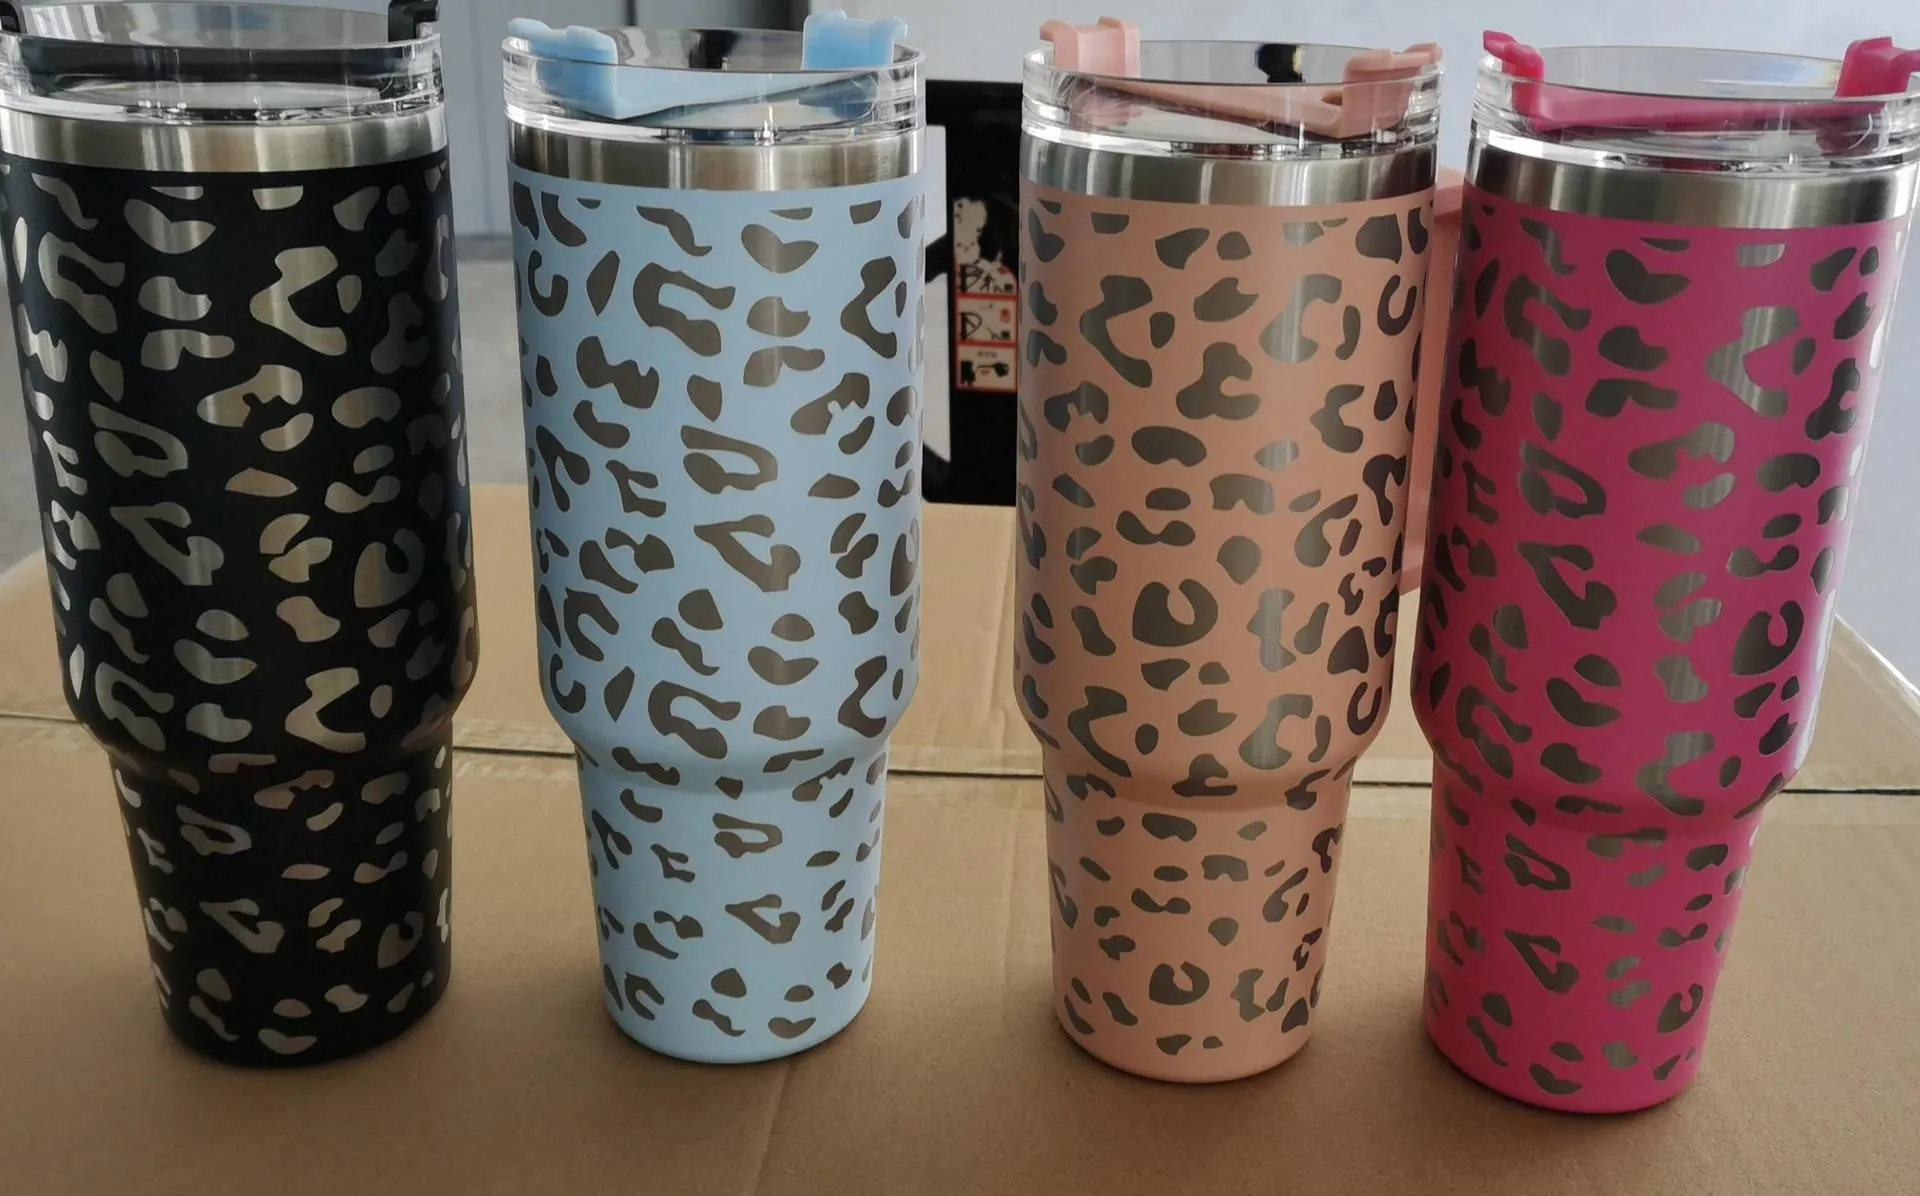 40oz stainless steel tumbler with handle lid straw big capacity beer mug Leopard water bottle outdoor camping cup vacuum insulated drinking tumblers